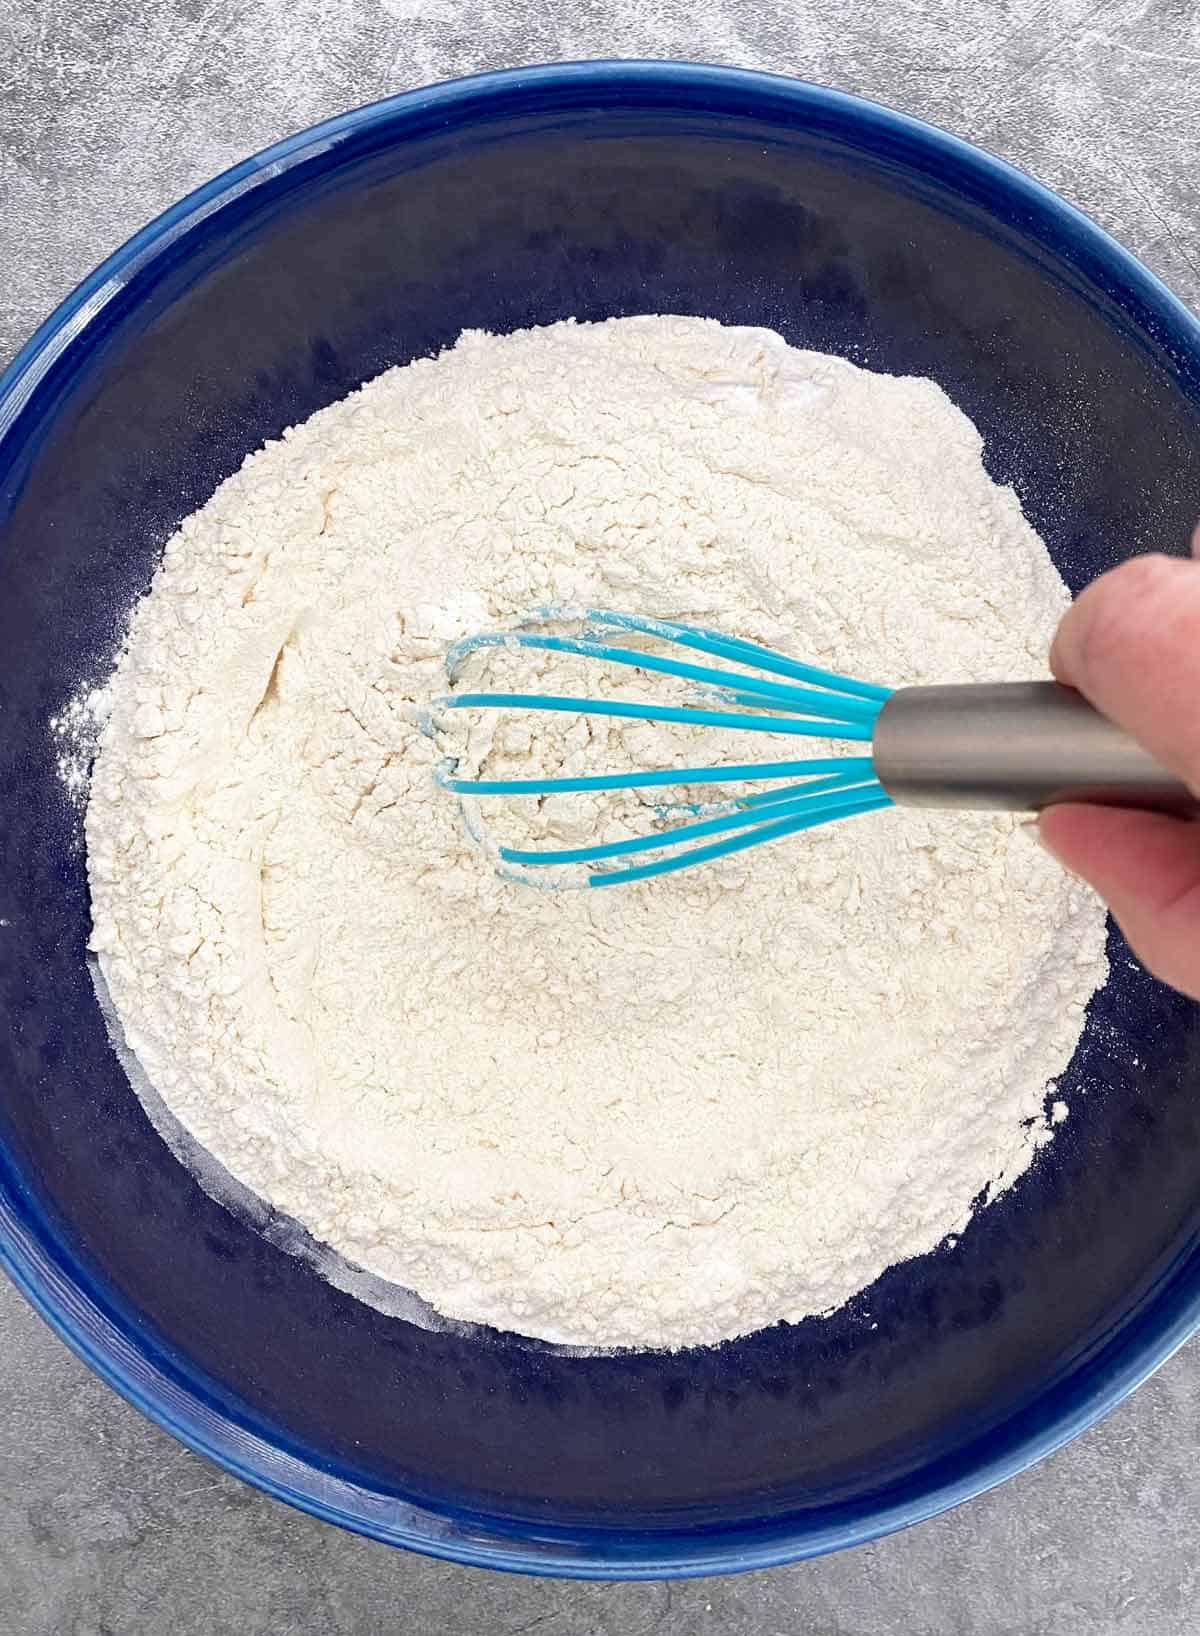 Whisking together flour, sugar, salt and baking powder in a blue bowl to combine.